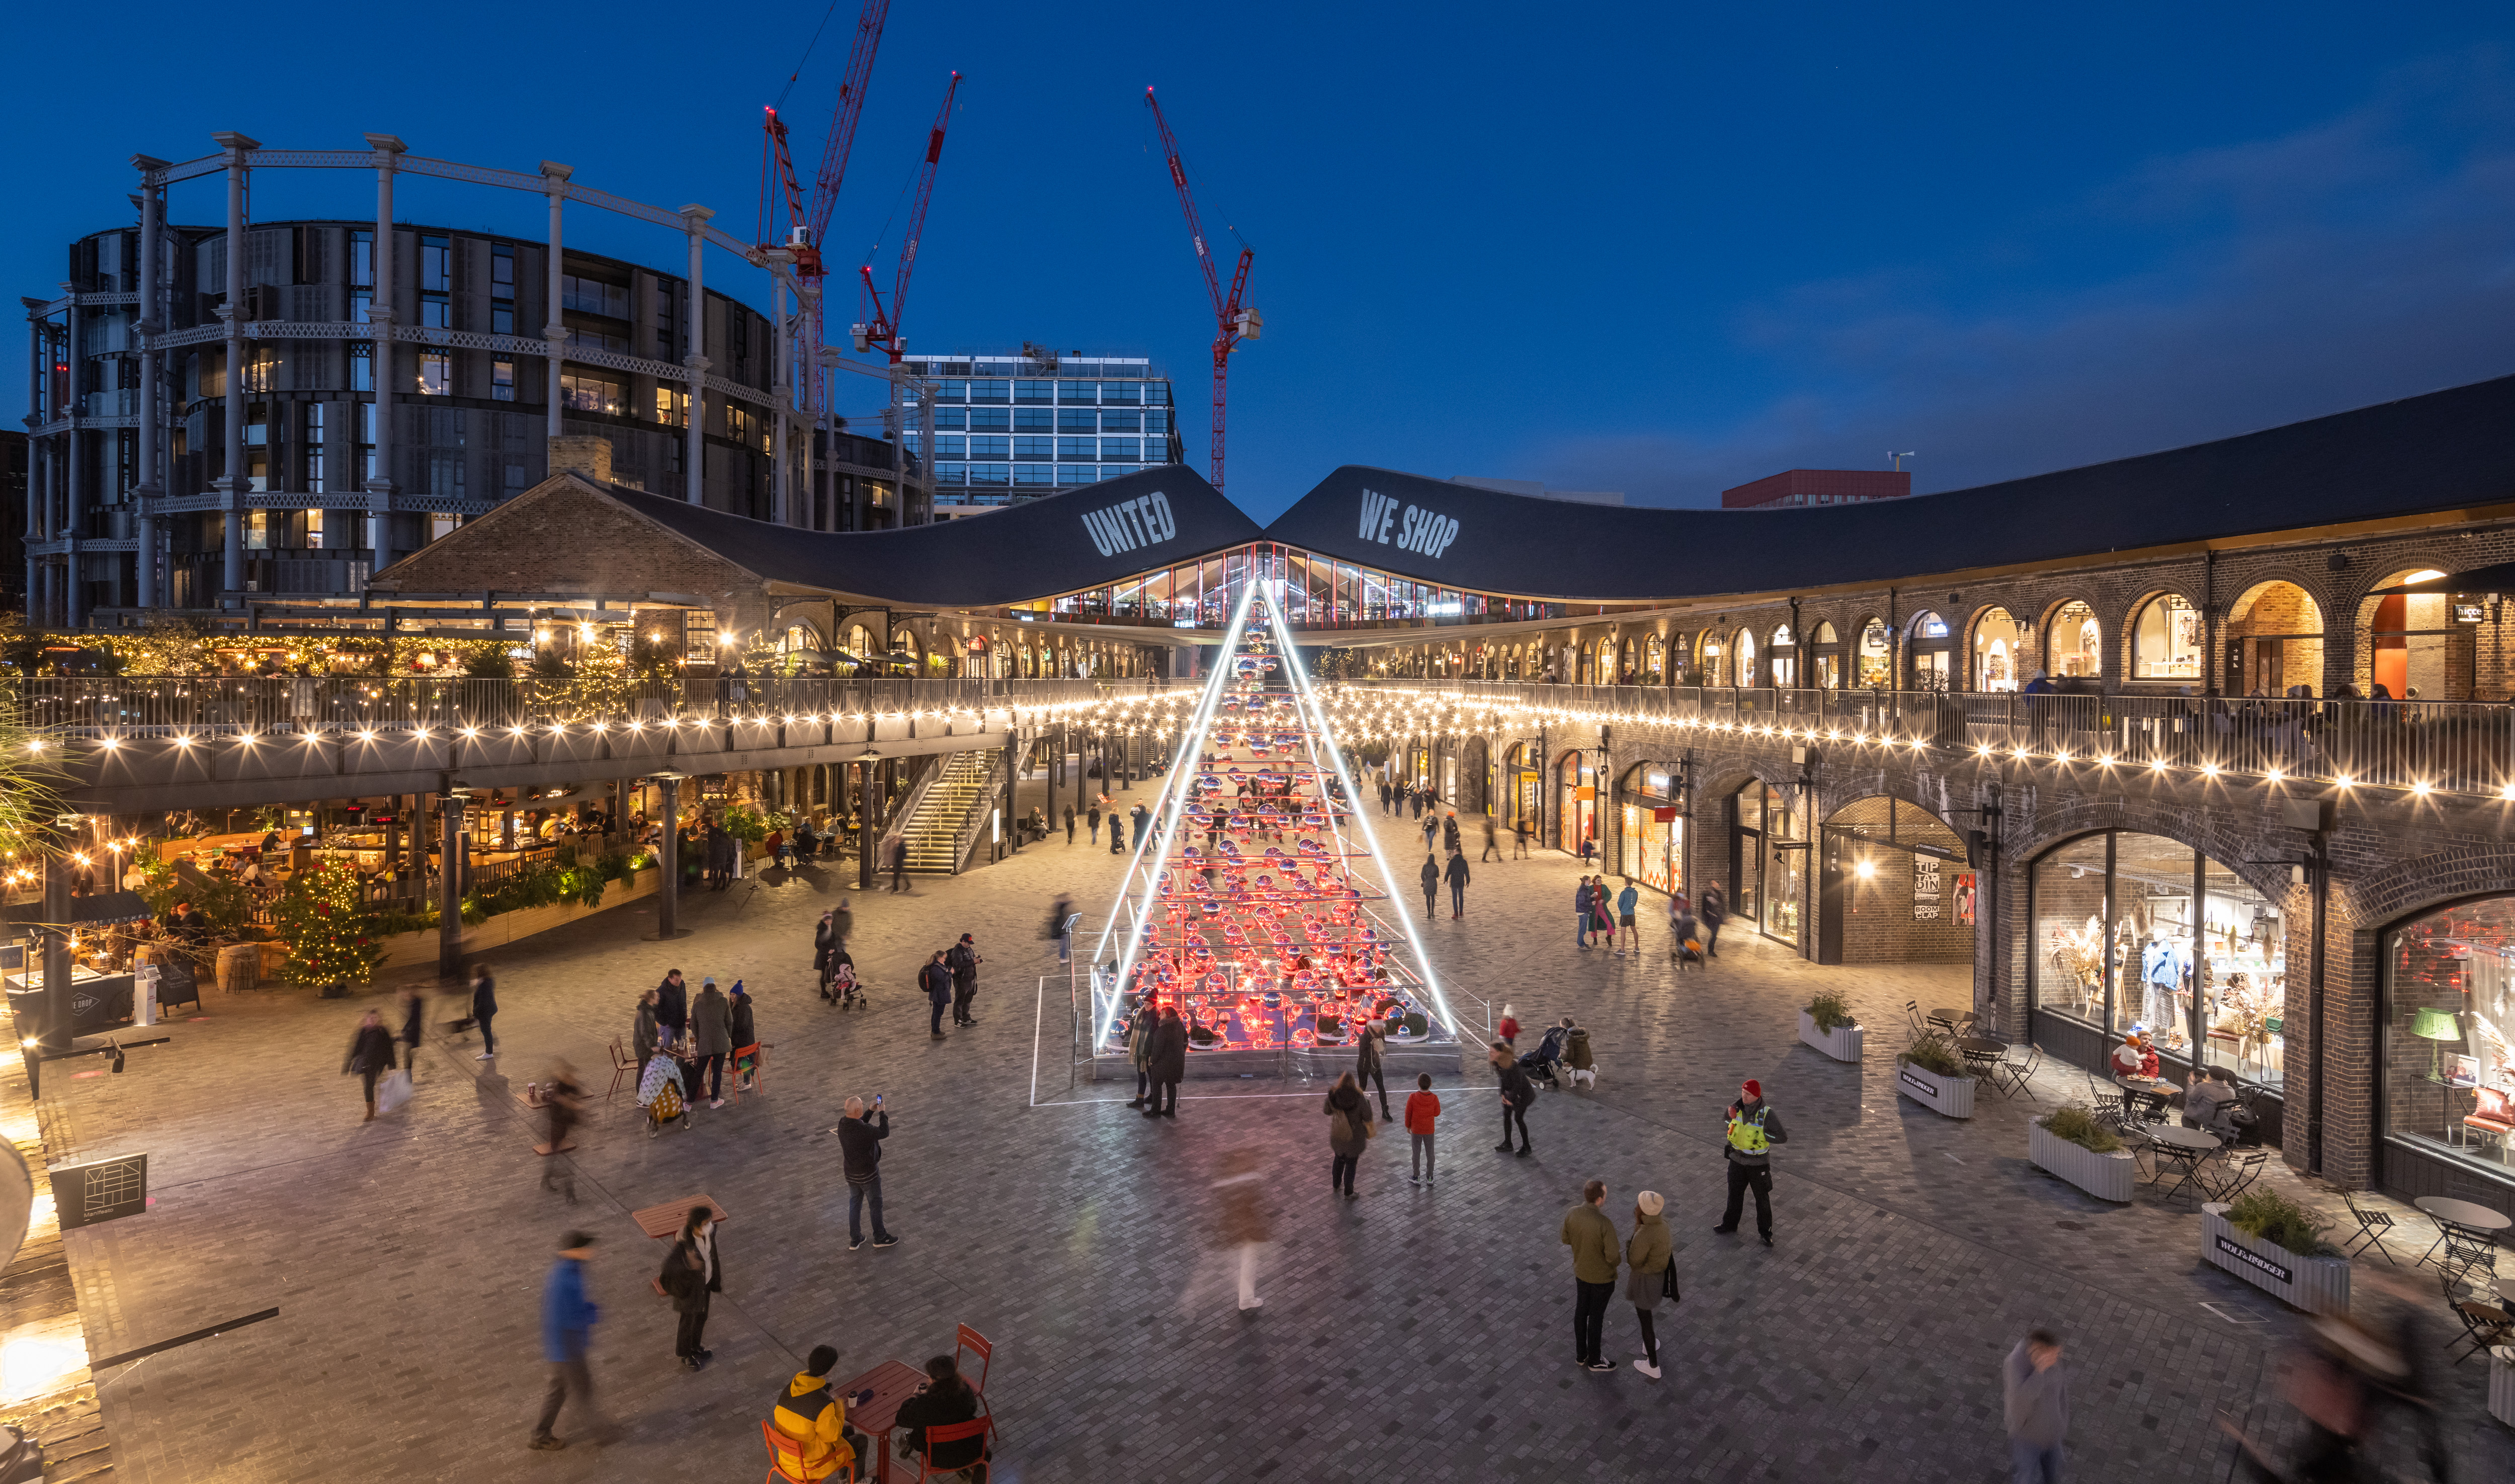 RG Jones Enlivens the Atmosphere at Coal Drops Yard with HARMAN Professional Solutions Networked Audio System